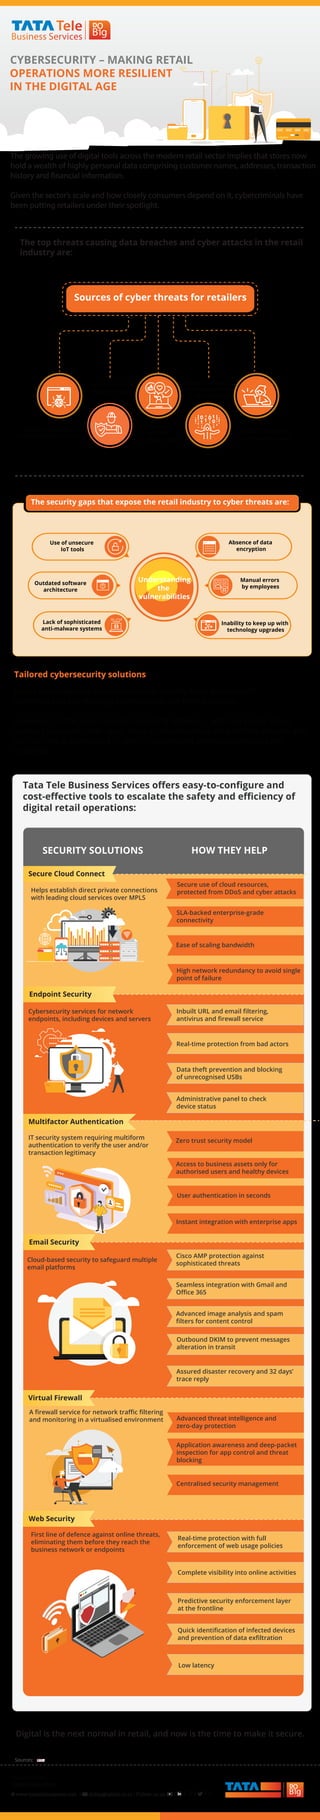 Major marketplaces and retail brands usually have dedicated IT
administrators to manage cybersecurity for their business.
However, for the small, locally operating retailers – who use public cloud
services to launch their apps, store critical business data in their devices and
do not have a specialised IT team – customised cybersecurity tools are
essential.
Sources:
#TimeToDoBig
1800-266-1800
www.tatatelebusiness.com | dobig@tatatel.co.in | Follow us on
IT security system requiring multiform
authentication to verify the user and/or
transaction legitimacy
A ﬁrewall service for network traﬃc ﬁltering
and monitoring in a virtualised environment
Digital is the next normal in retail, and now is the time to make it secure.
Information
available
on social media
Malware infestation
by phishing/hacking
Malware infestation
by 3rd party/own systems
Insider's job with
malicious intent
Usage of advanced
technologies such
as ML by hackers
CYBERSECURITY – MAKING RETAIL
OPERATIONS MORE RESILIENT
IN THE DIGITAL AGE
The growing use of digital tools across the modern retail sector implies that stores now
hold a wealth of highly personal data comprising customer names, addresses, transaction
history and financial information.
Given the sector’s scale and how closely consumers depend on it, cybercriminals have
been putting retailers under their spotlight.
The top threats causing data breaches and cyber attacks in the retail
industry are:
The security gaps that expose the retail industry to cyber threats are:
Use of unsecure
IoT tools
Outdated software
architecture
Absence of data
encryption
Tailored cybersecurity solutions
Tata Tele Business Services oﬀers easy-to-conﬁgure and
cost-eﬀective tools to escalate the safety and eﬃciency of
digital retail operations:
Cybersecurity services for network
endpoints, including devices and servers
Helps establish direct private connections
with leading cloud services over MPLS
Endpoint Security
Multifactor Authentication
Cloud-based security to safeguard multiple
email platforms
Email Security
Virtual Firewall
First line of defence against online threats,
eliminating them before they reach the
business network or endpoints
Web Security
Understanding
the
vulnerabilities
Lack of sophisticated
anti-malware systems
Manual errors
by employees
Inability to keep up with
technology upgrades
Sources of cyber threats for retailers
SECURITY SOLUTIONS HOW THEY HELP
Secure Cloud Connect
Secure use of cloud resources,
protected from DDoS and cyber attacks
SLA-backed enterprise-grade
connectivity
Ease of scaling bandwidth
High network redundancy to avoid single
point of failure
Inbuilt URL and email ﬁltering,
antivirus and ﬁrewall service
Real-time protection from bad actors
Data theft prevention and blocking
of unrecognised USBs
Administrative panel to check
device status
Zero trust security model
Access to business assets only for
authorised users and healthy devices
User authentication in seconds
Instant integration with enterprise apps
Cisco AMP protection against
sophisticated threats
Seamless integration with Gmail and
Oﬃce 365
Advanced image analysis and spam
ﬁlters for content control
Outbound DKIM to prevent messages
alteration in transit
Assured disaster recovery and 32 days’
trace reply
Advanced threat intelligence and
zero-day protection
Application awareness and deep-packet
inspection for app control and threat
blocking
Centralised security management
Real-time protection with full
enforcement of web usage policies
Complete visibility into online activities
Predictive security enforcement layer
at the frontline
Quick identiﬁcation of infected devices
and prevention of data exﬁltration
Low latency
 